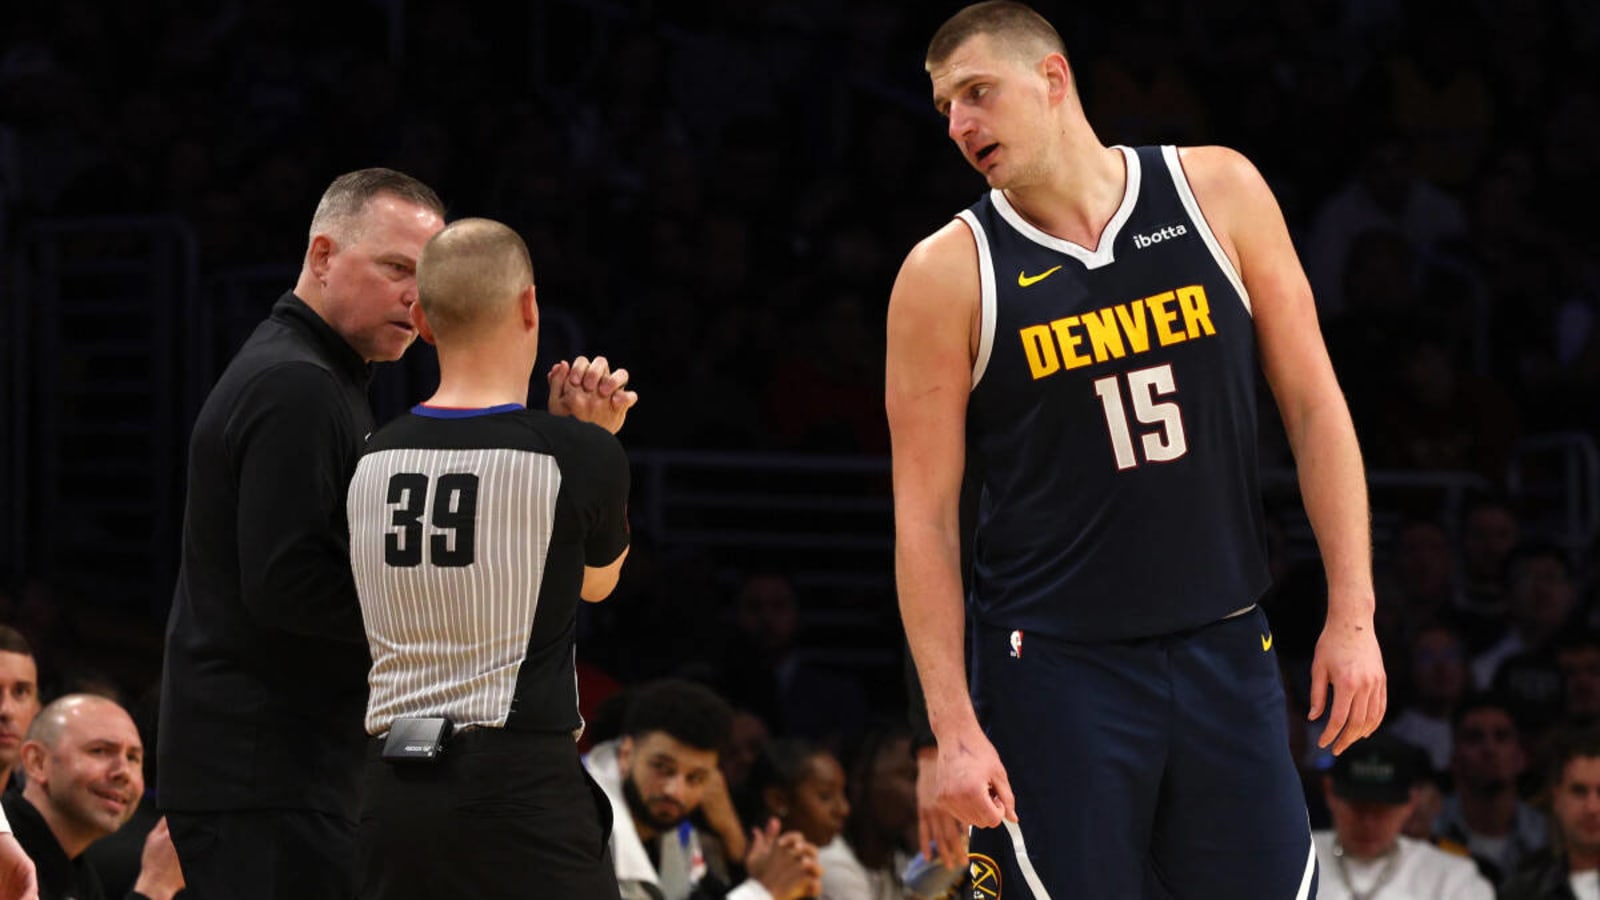 Mike Malone Trolls Referees After Nikola Jokic Shot 0 Free Throws Against Lakers In Game 5